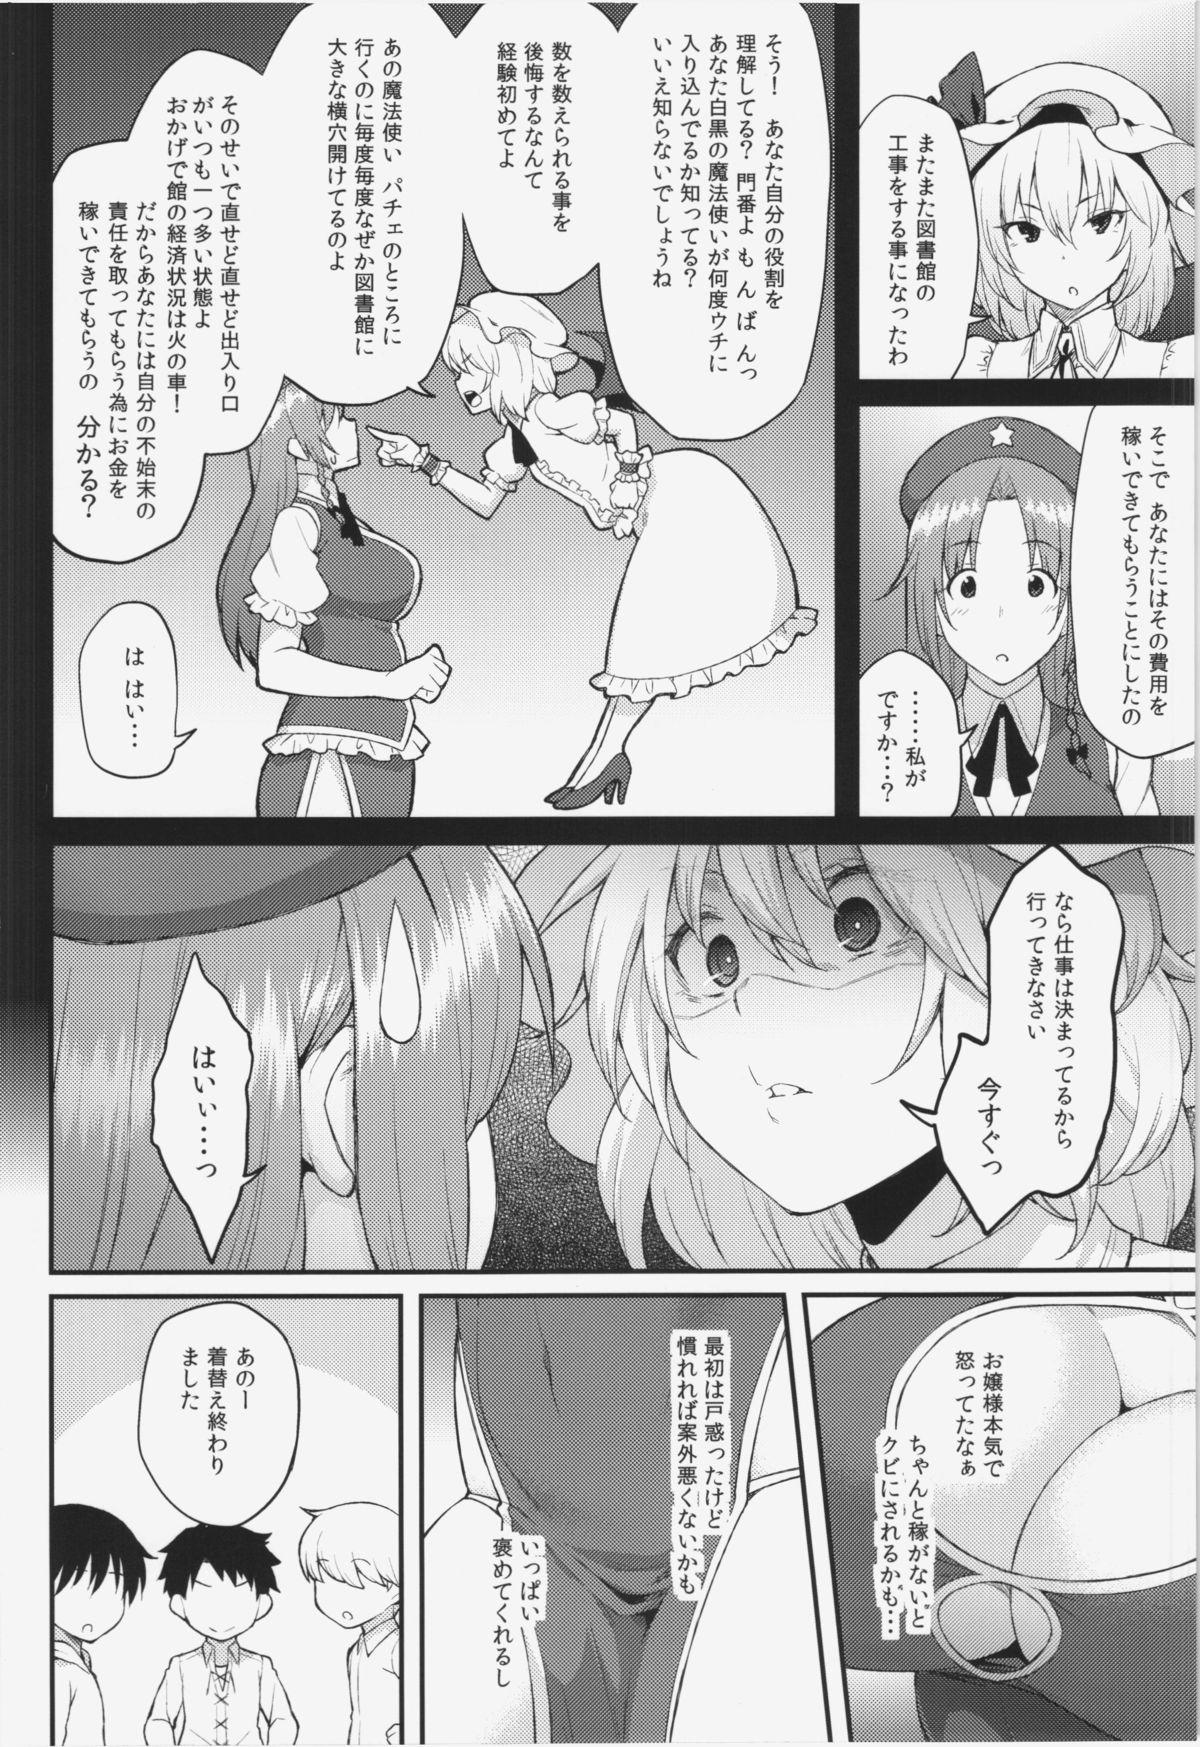 Fetiche Hong Meiling no Oshigoto - Touhou project Fist - Page 4